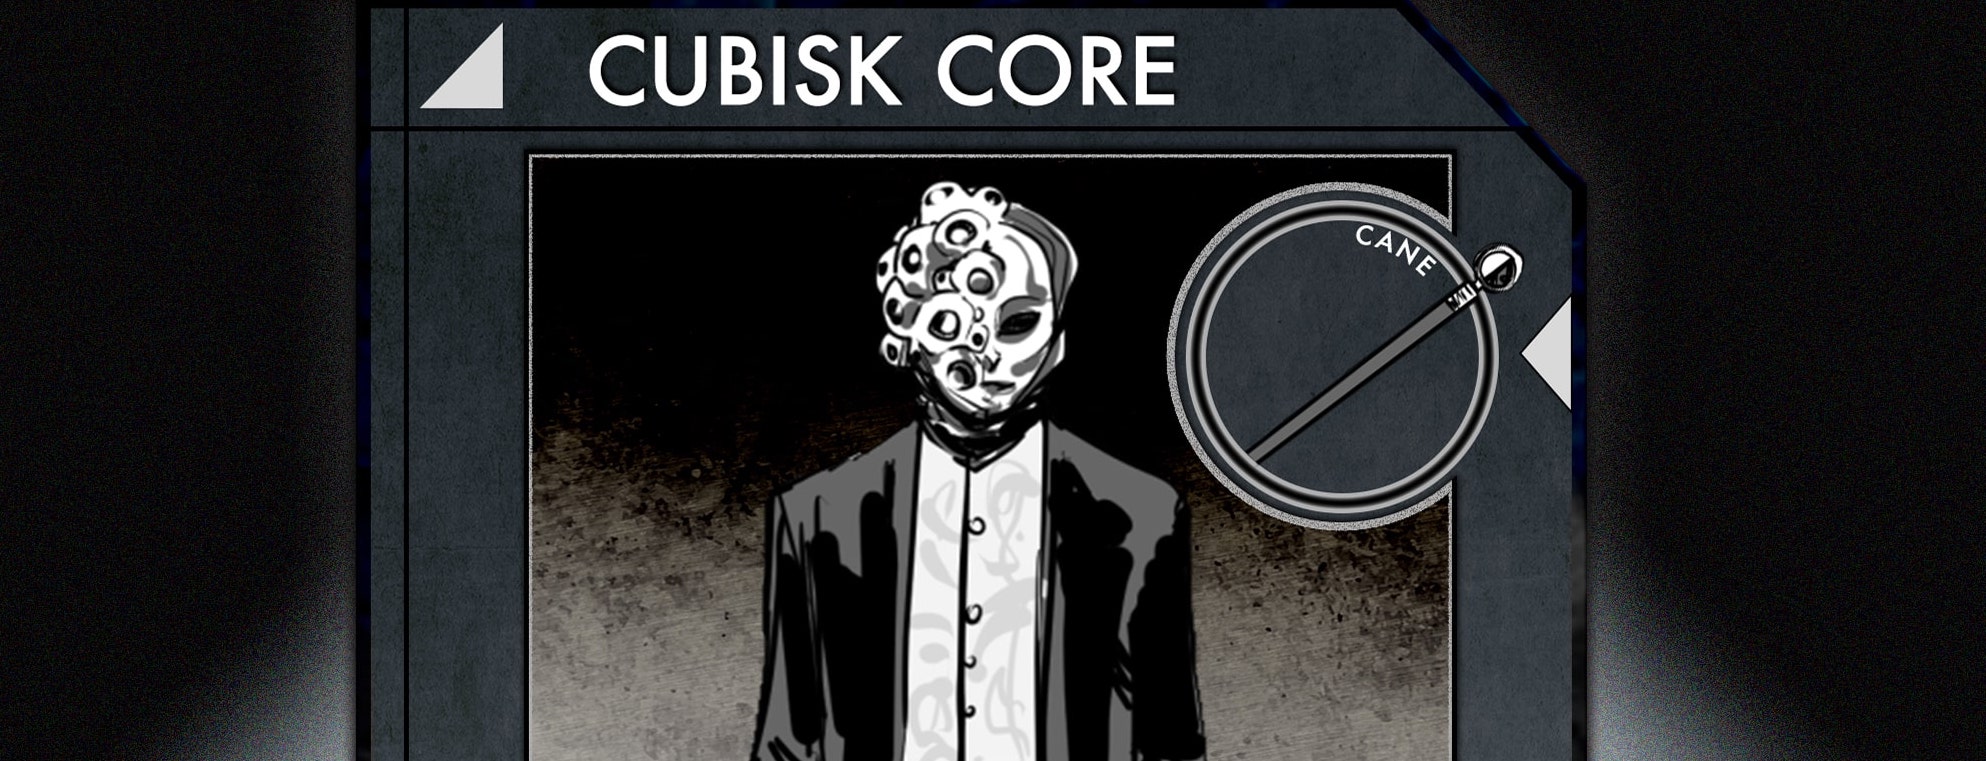 Get to know new 'G.O.D.S.' character Cubisk Core